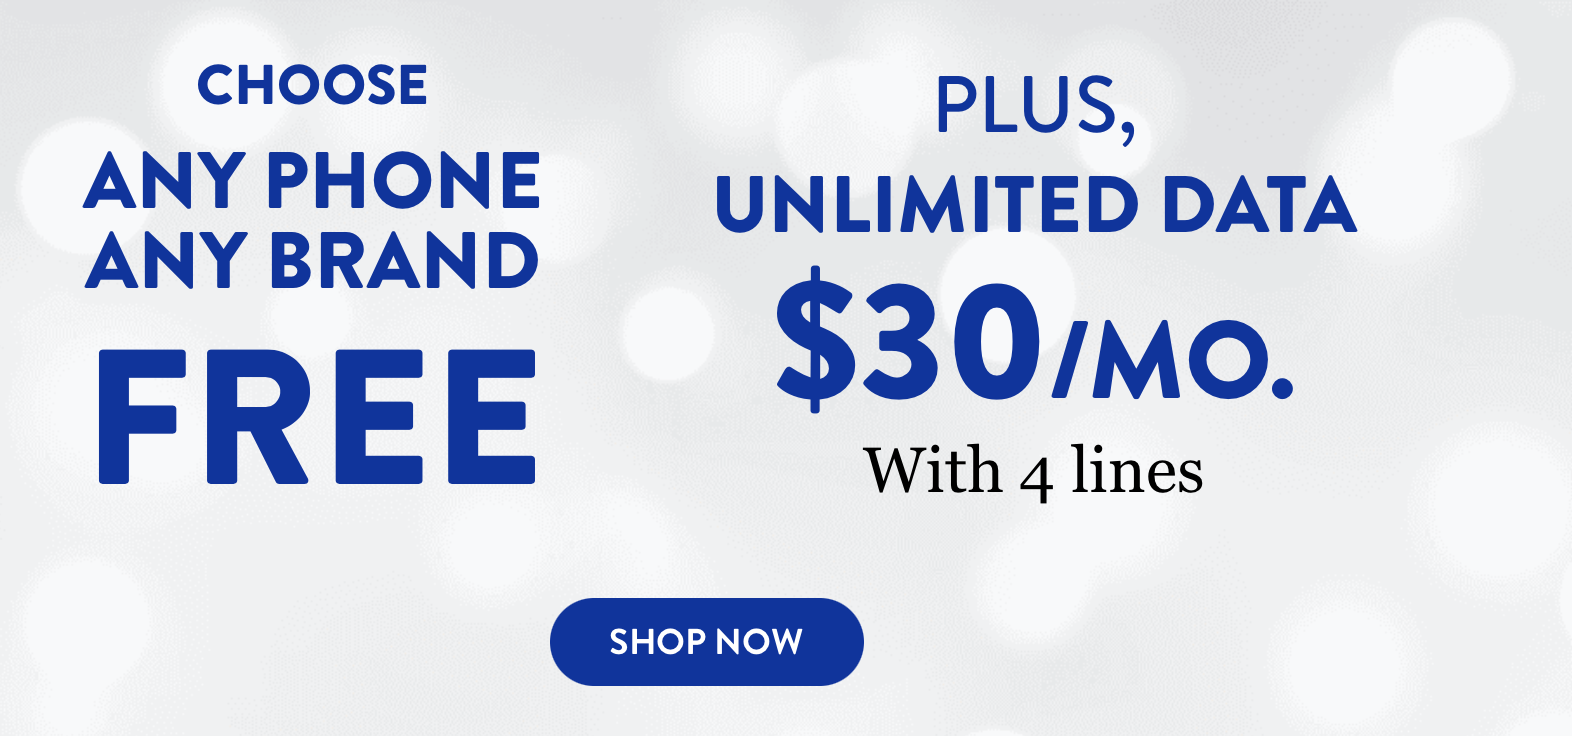 Free Phone for 30 Months by us cellular